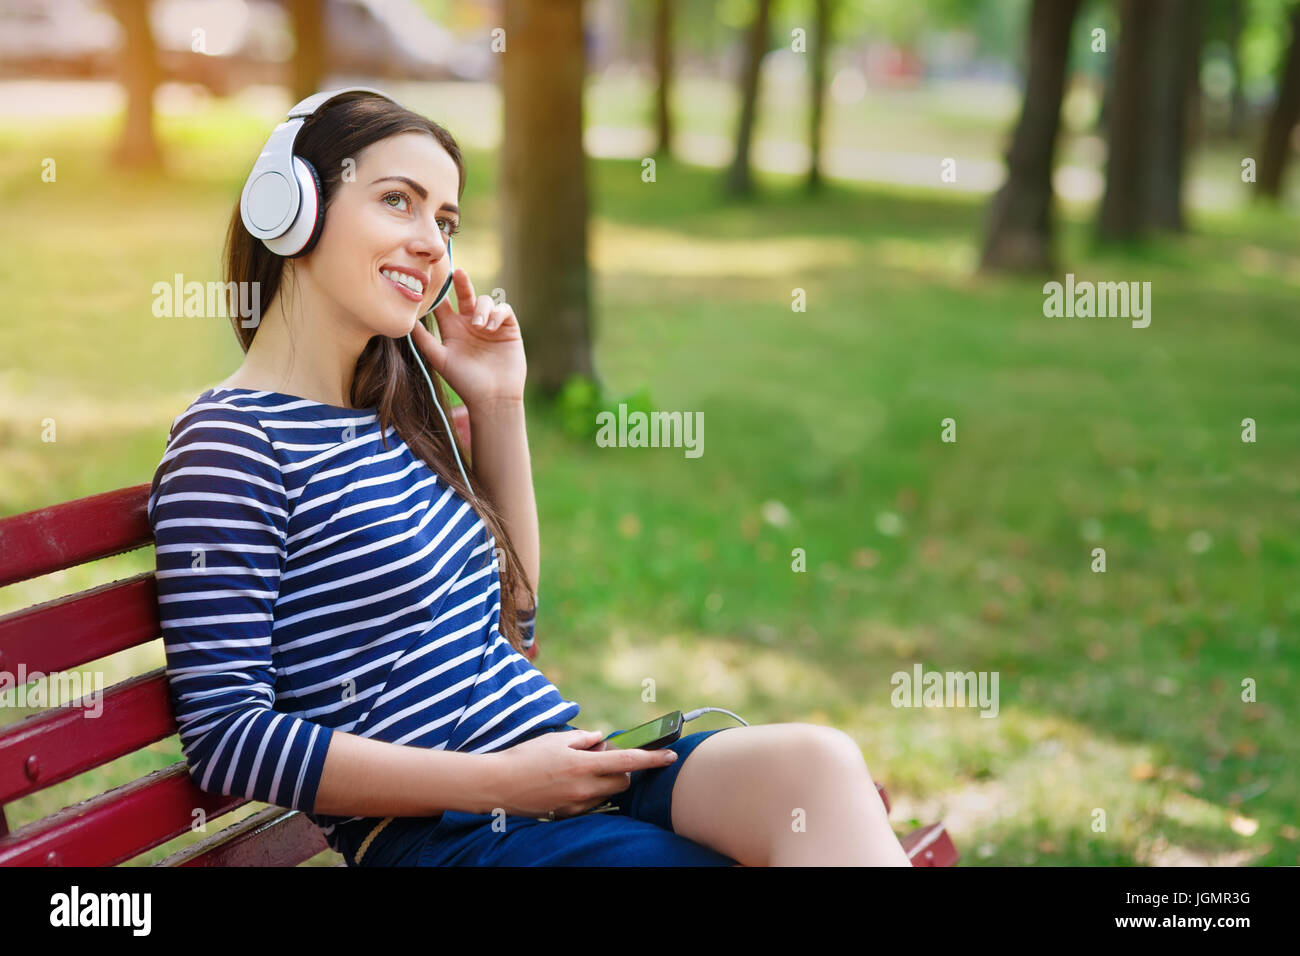 Young happy smiling brunette woman with headphones outdoors on summer day. Girl listening music in headphones in park Stock Photo